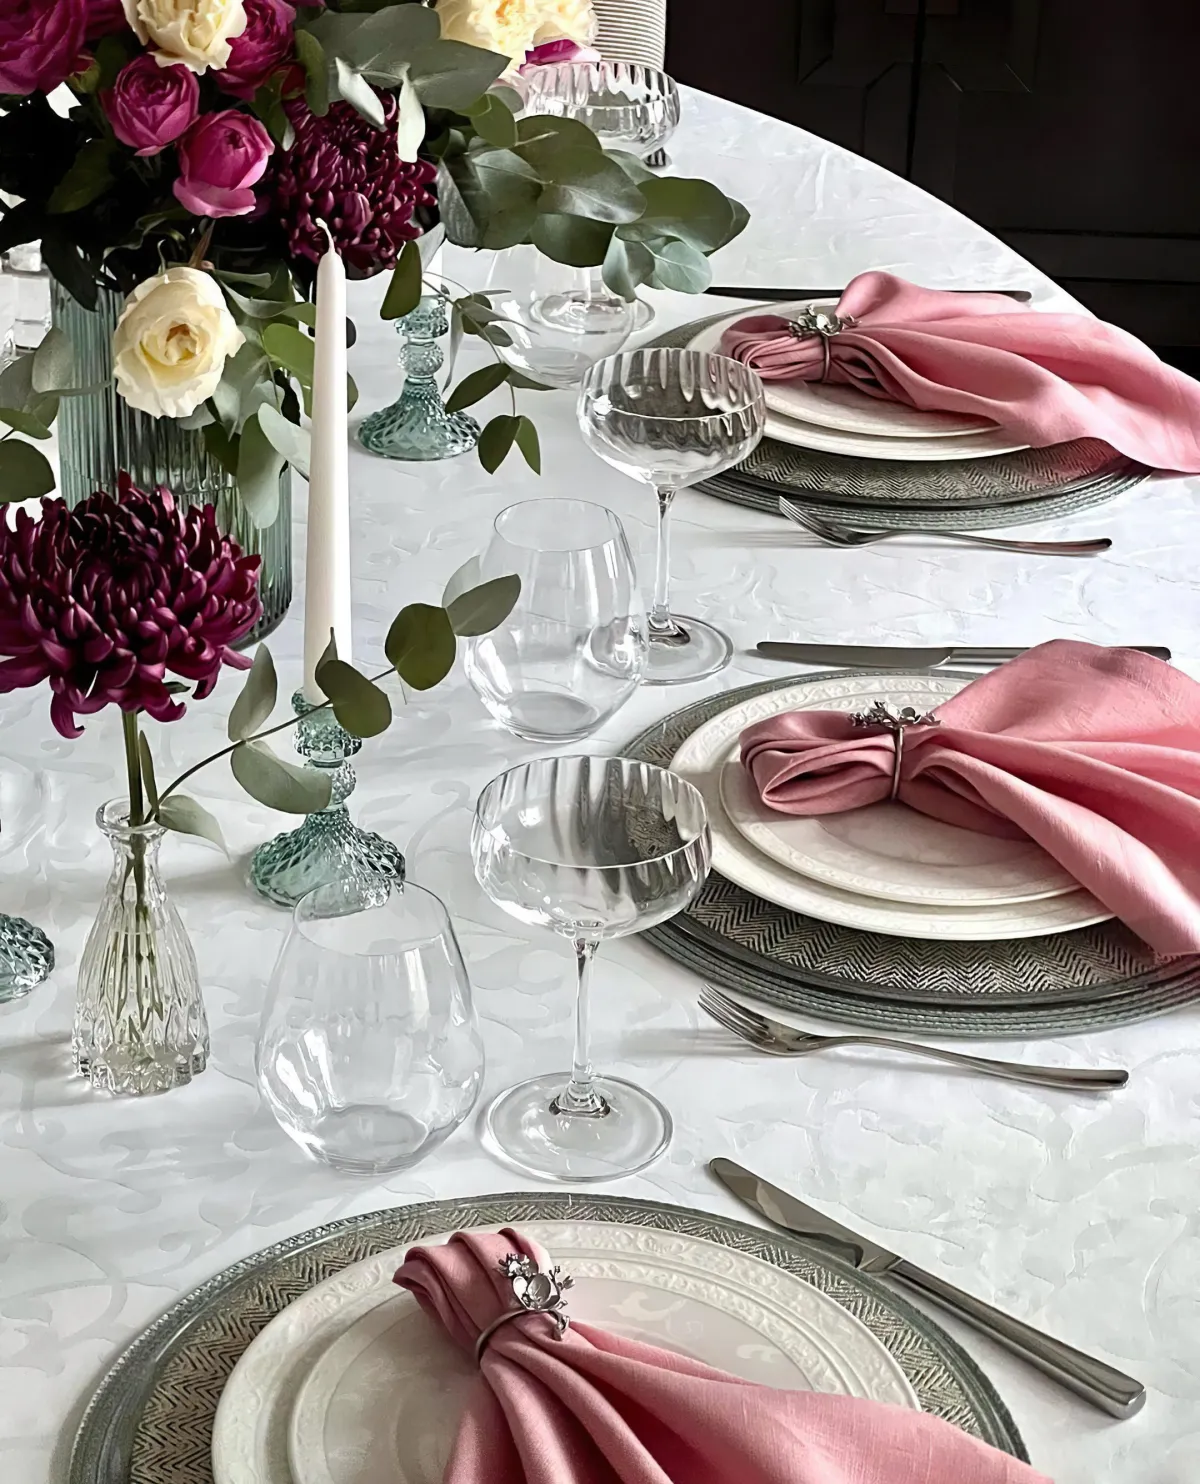 Dining table decorating ideas Pink linen napkins Roses in glass vases